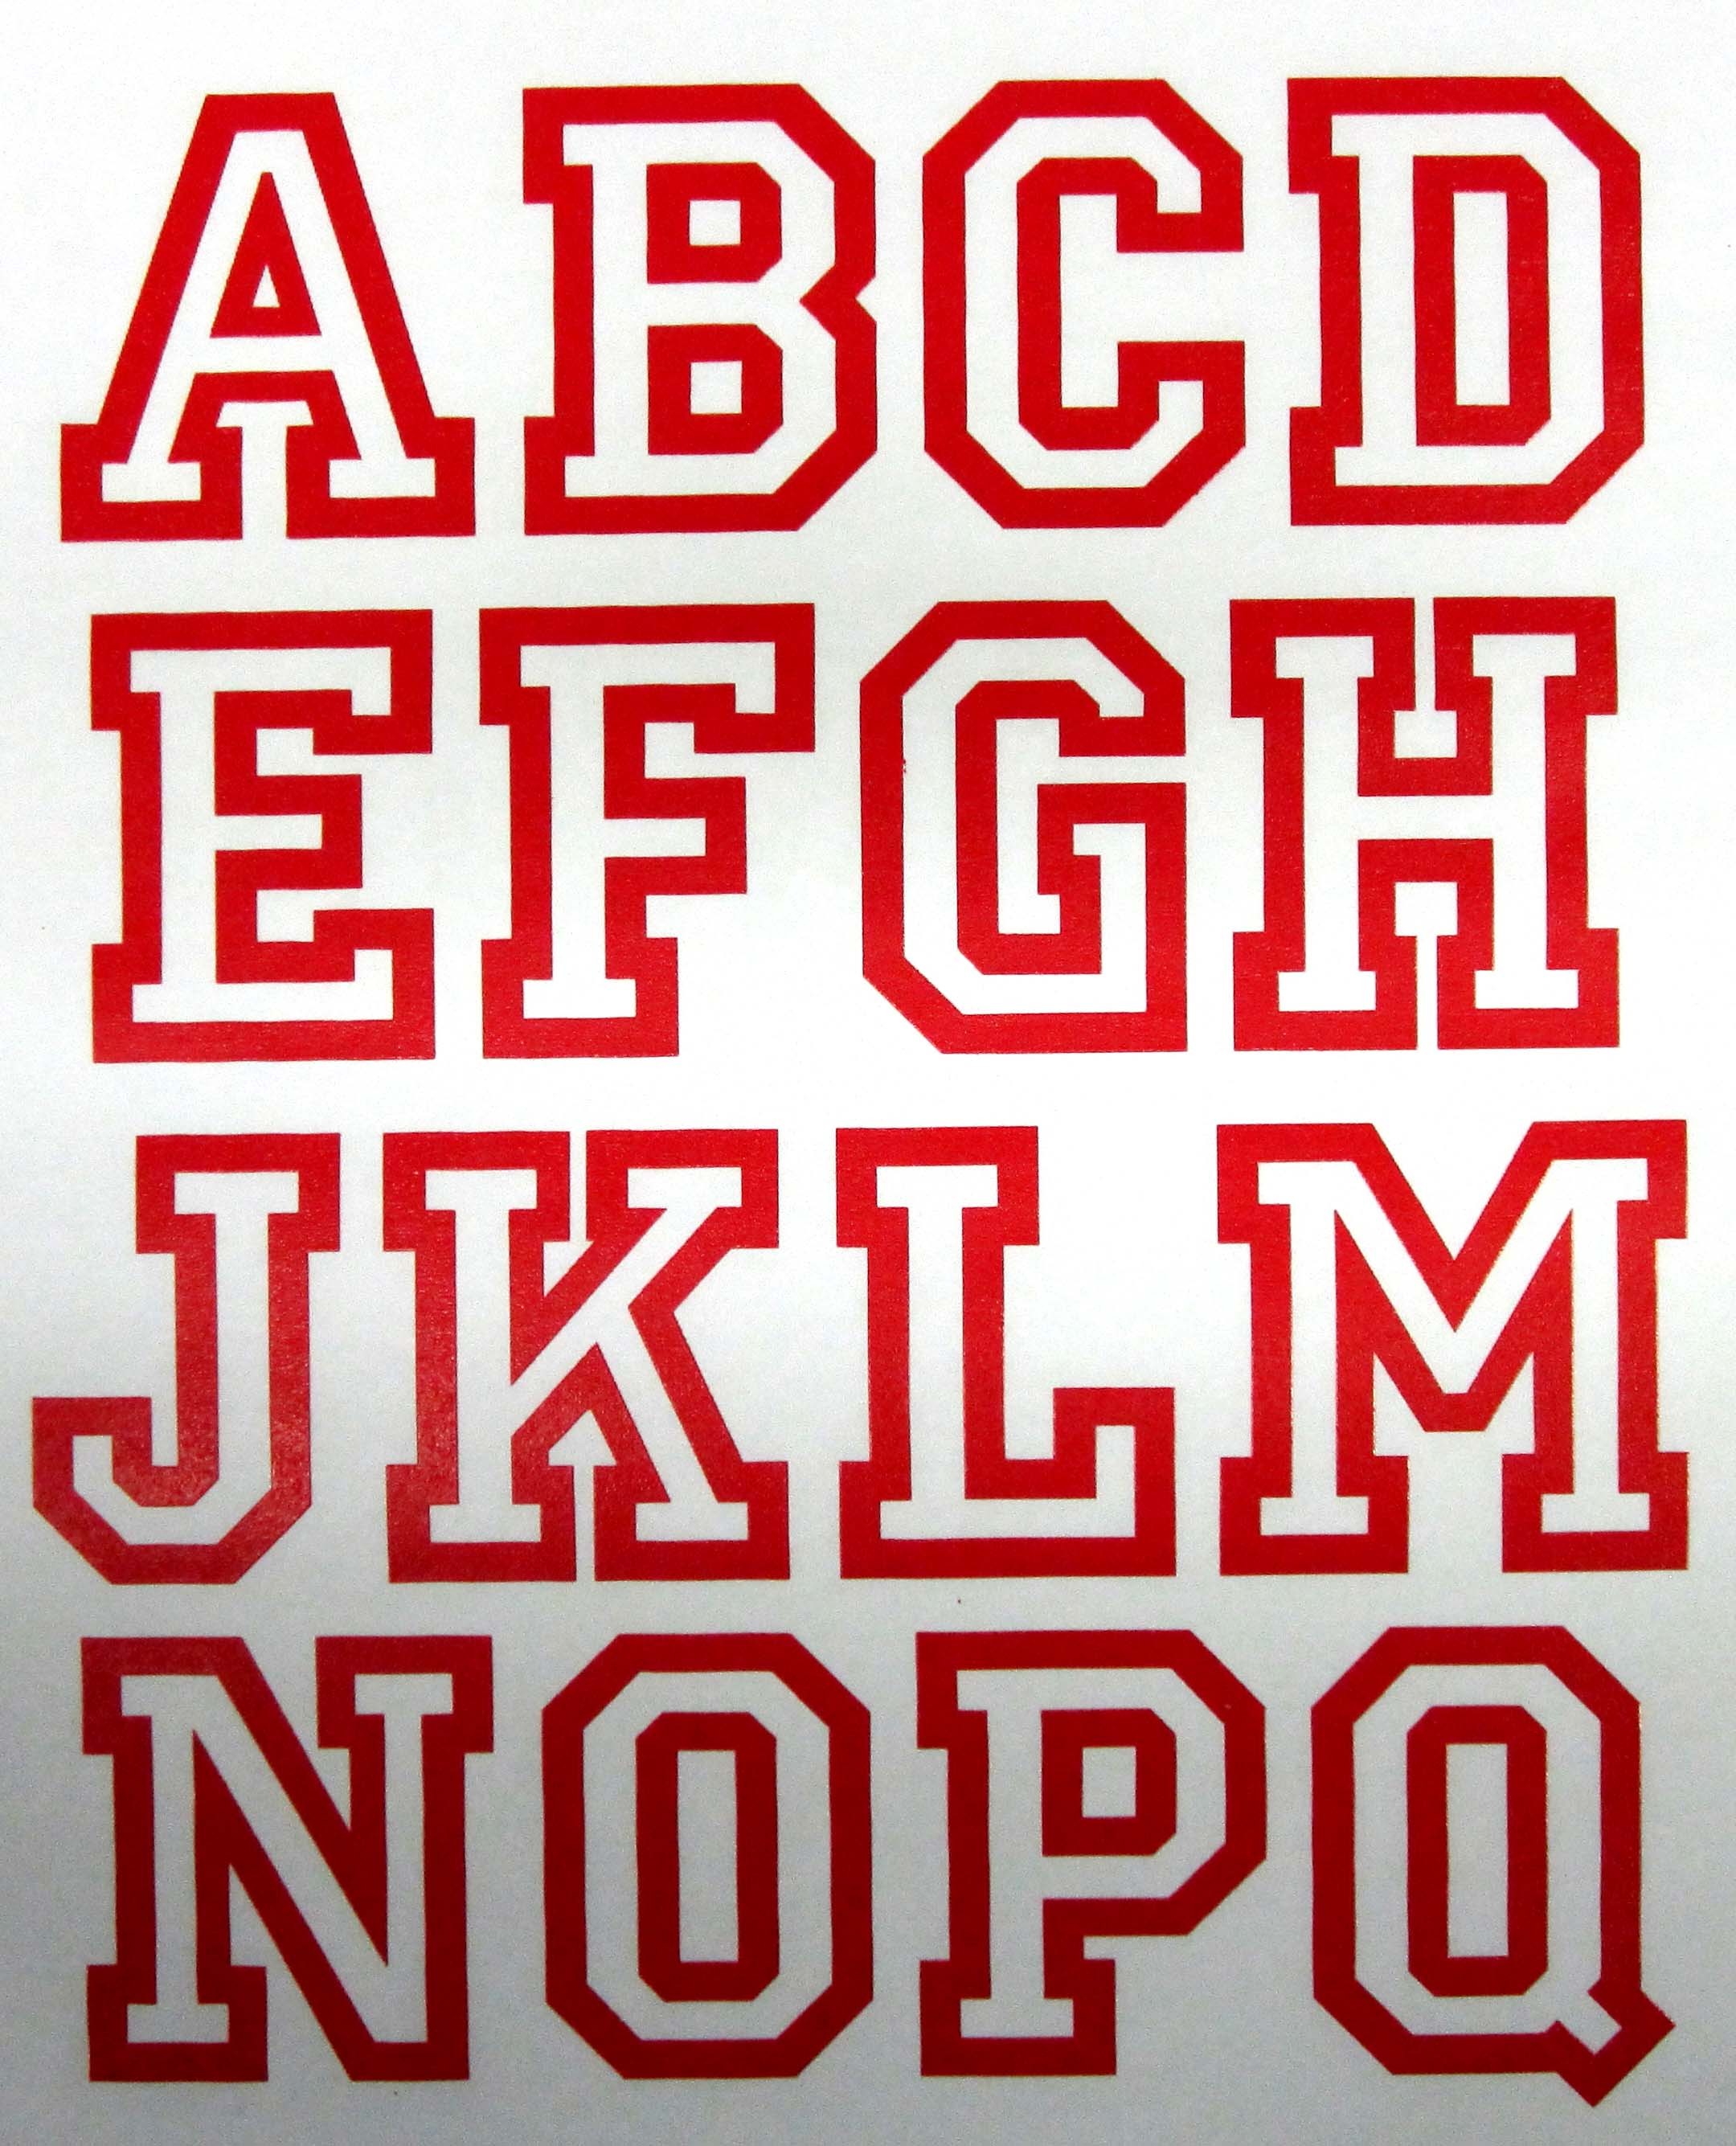 Athletic Fonts For Jerseys